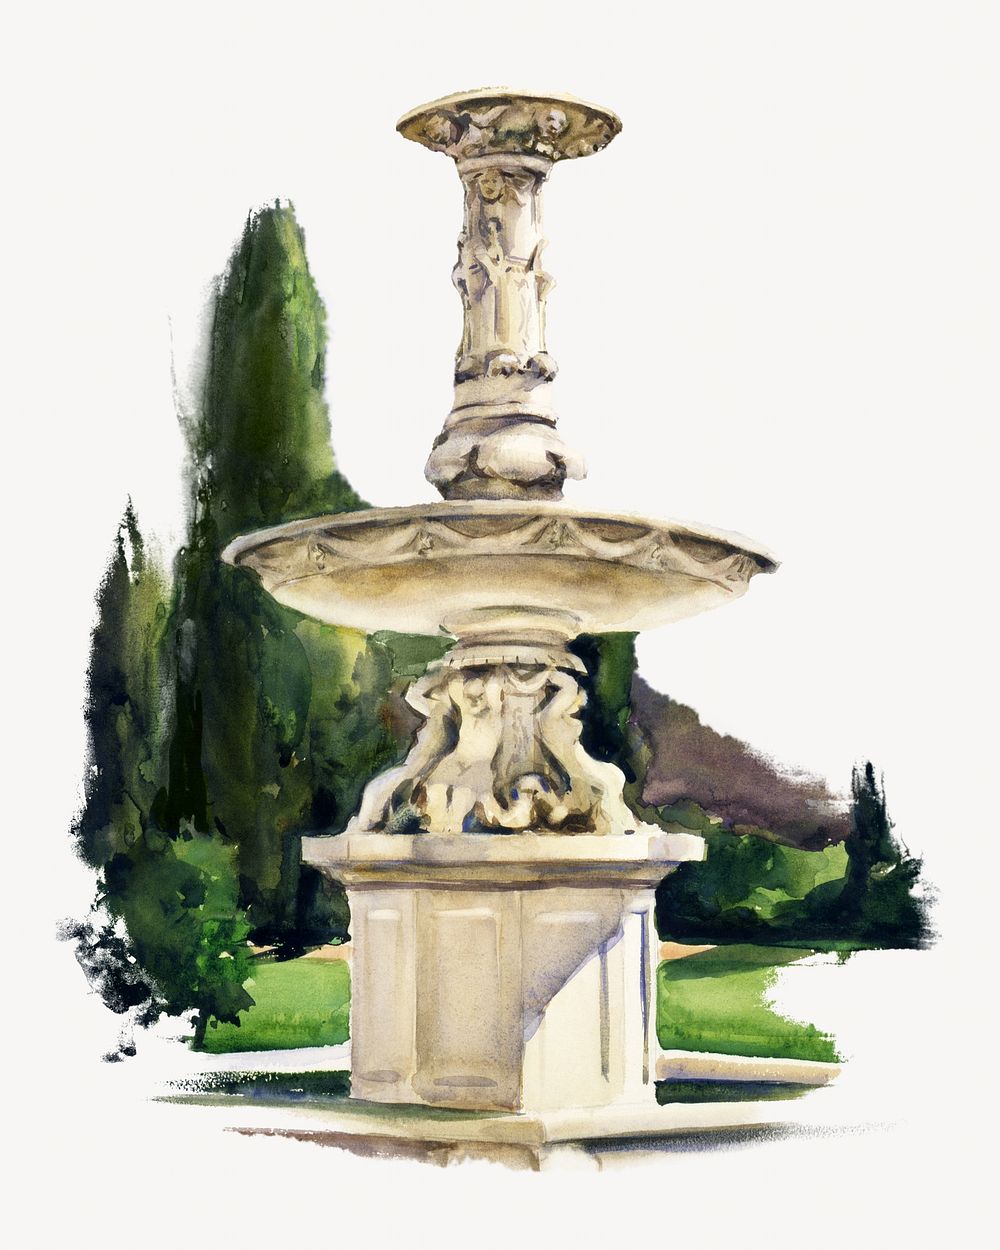 Vintage marble fountain illustration. Remixed by rawpixel.